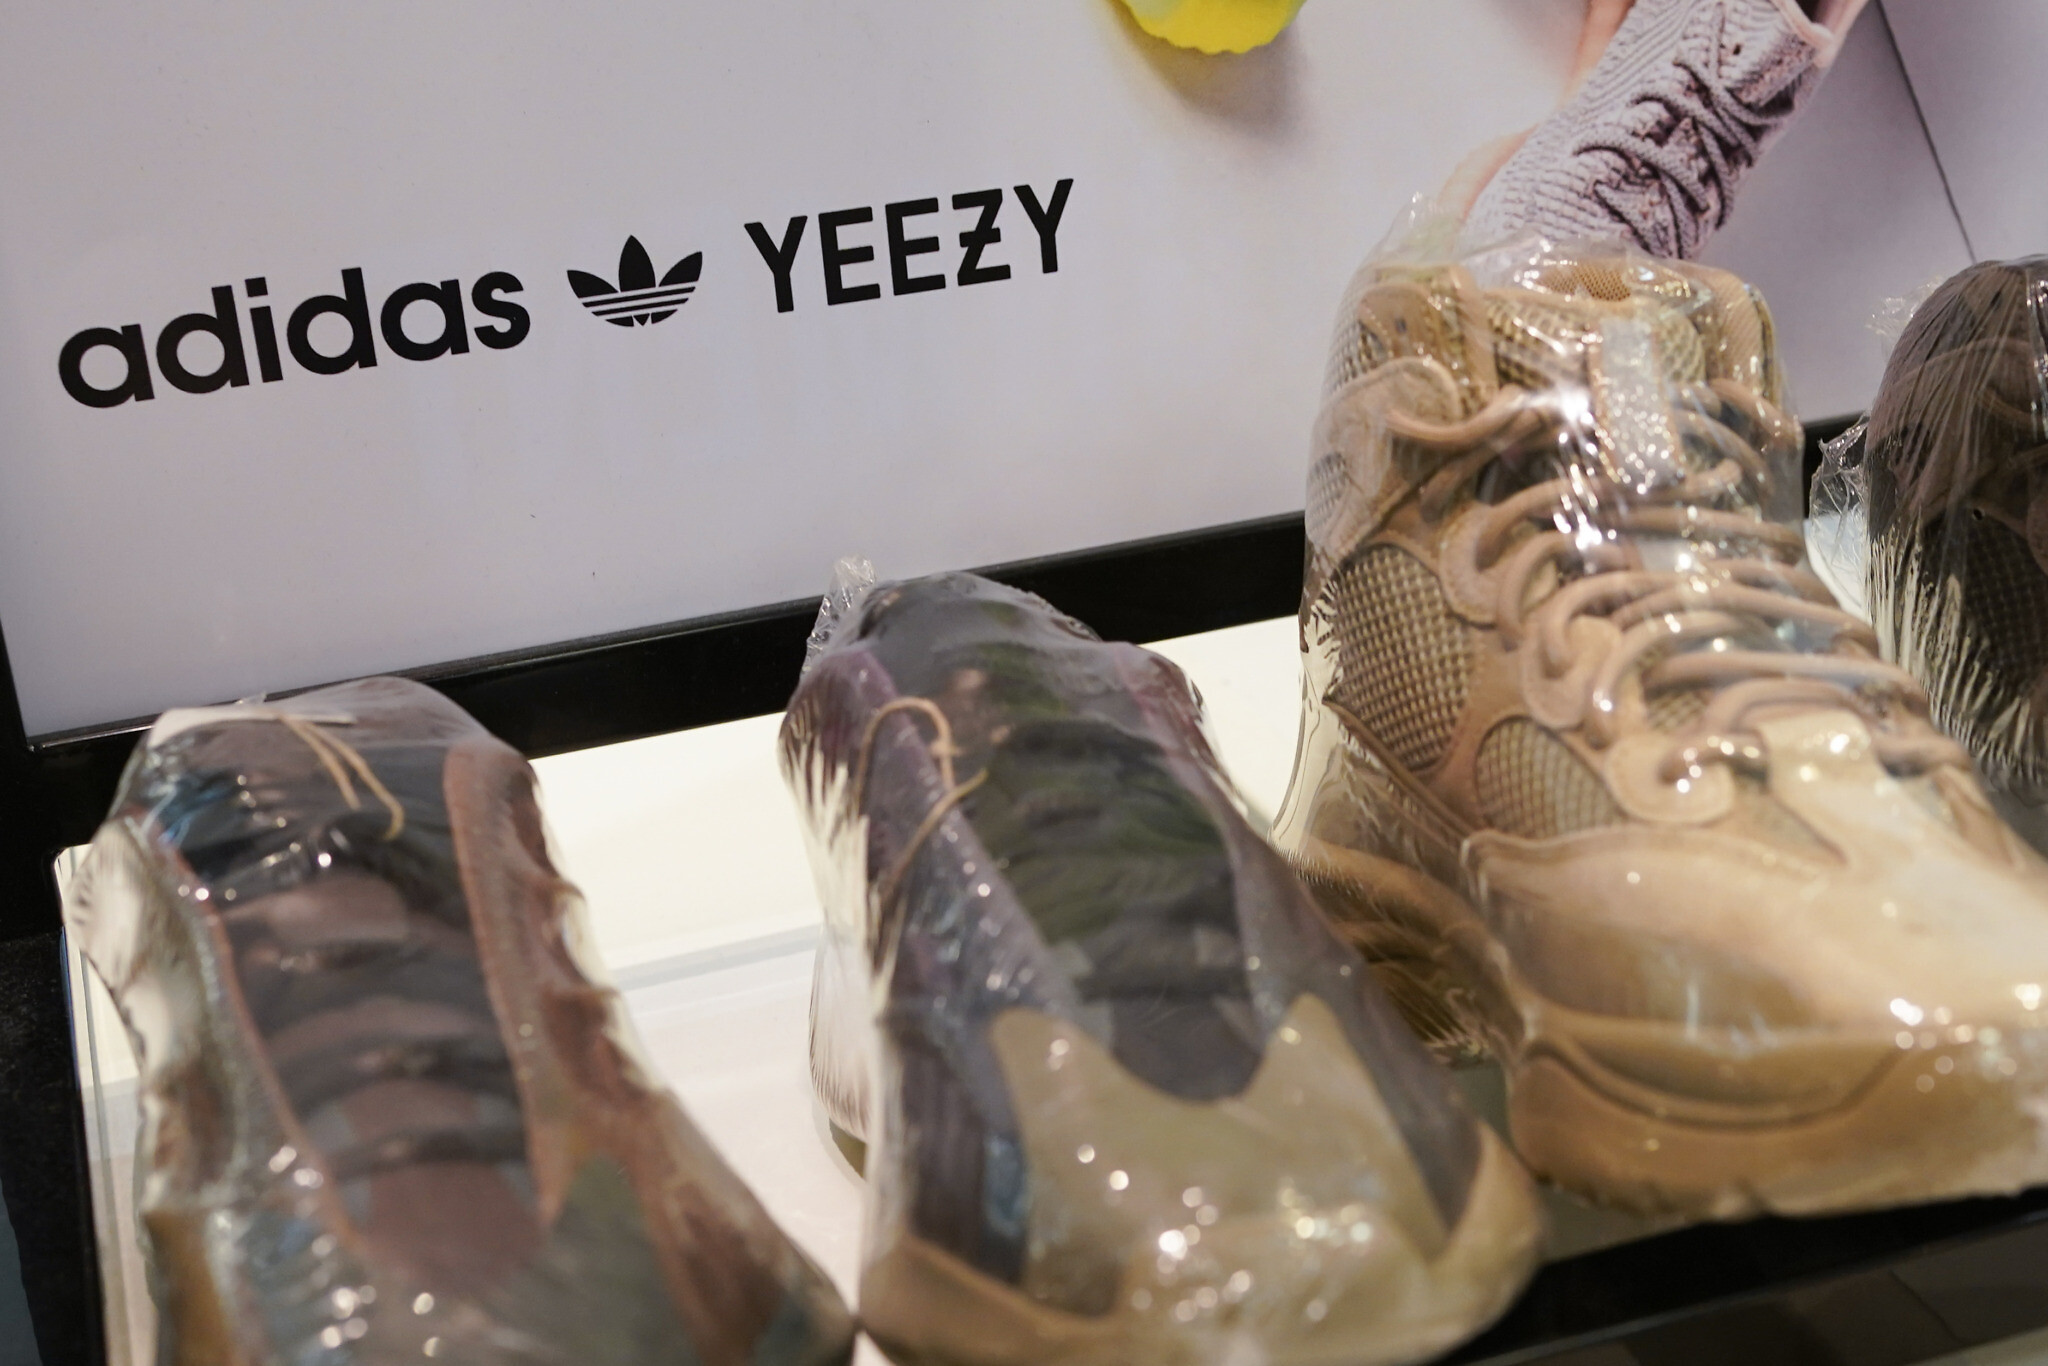 Ceder el paso Enfadarse fractura US Jews commend Adidas for donating surplus Yeezy sales to anti-hate groups  | The Times of Israel